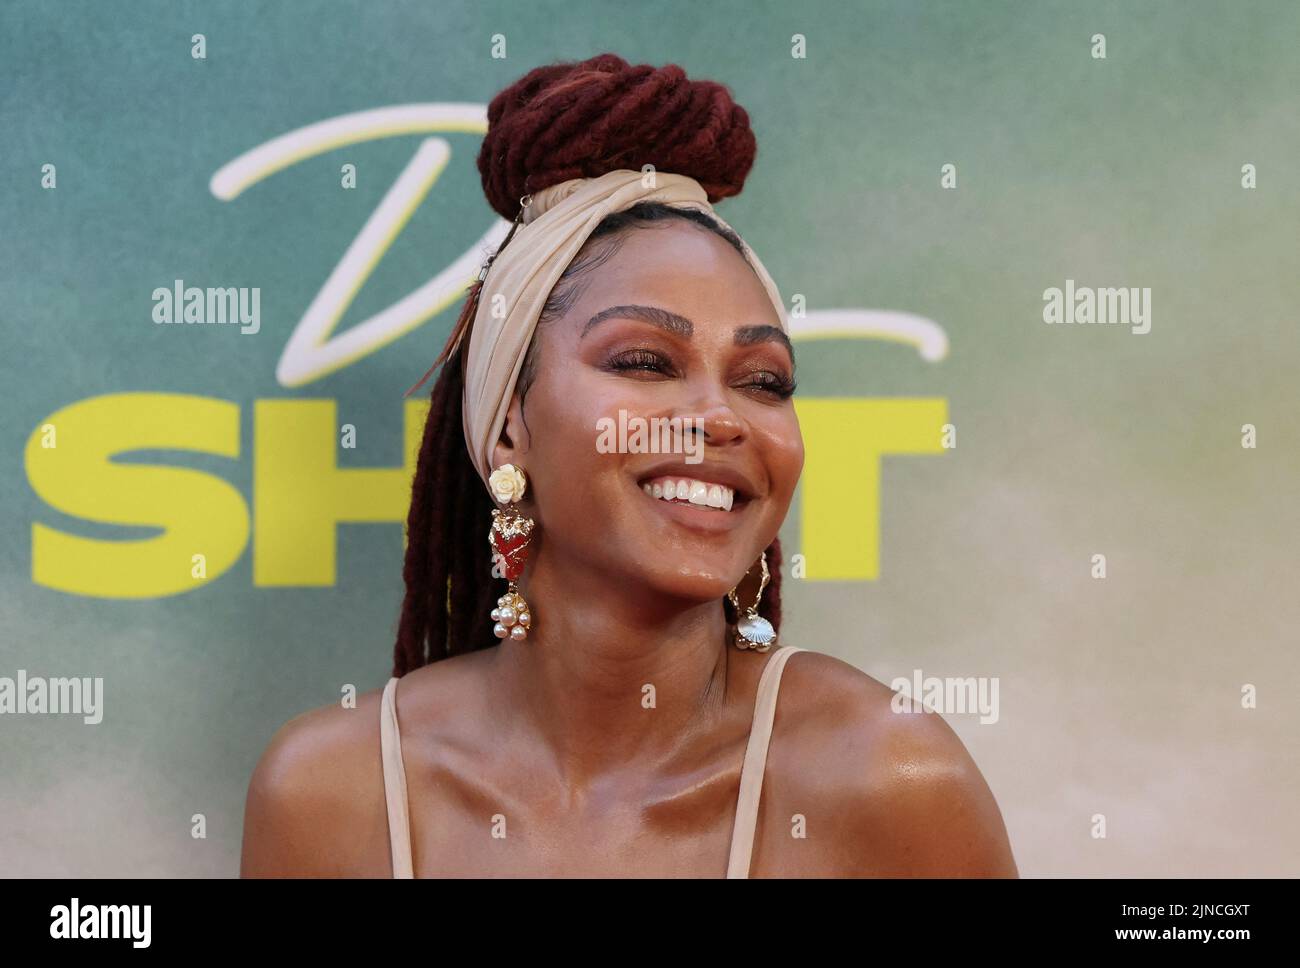 Cast member Meagan Good attends the premiere for the film Day Shift in Los Angeles, California, U.S., August 10, 2022. REUTERS/Mario Anzuoni Stock Photo